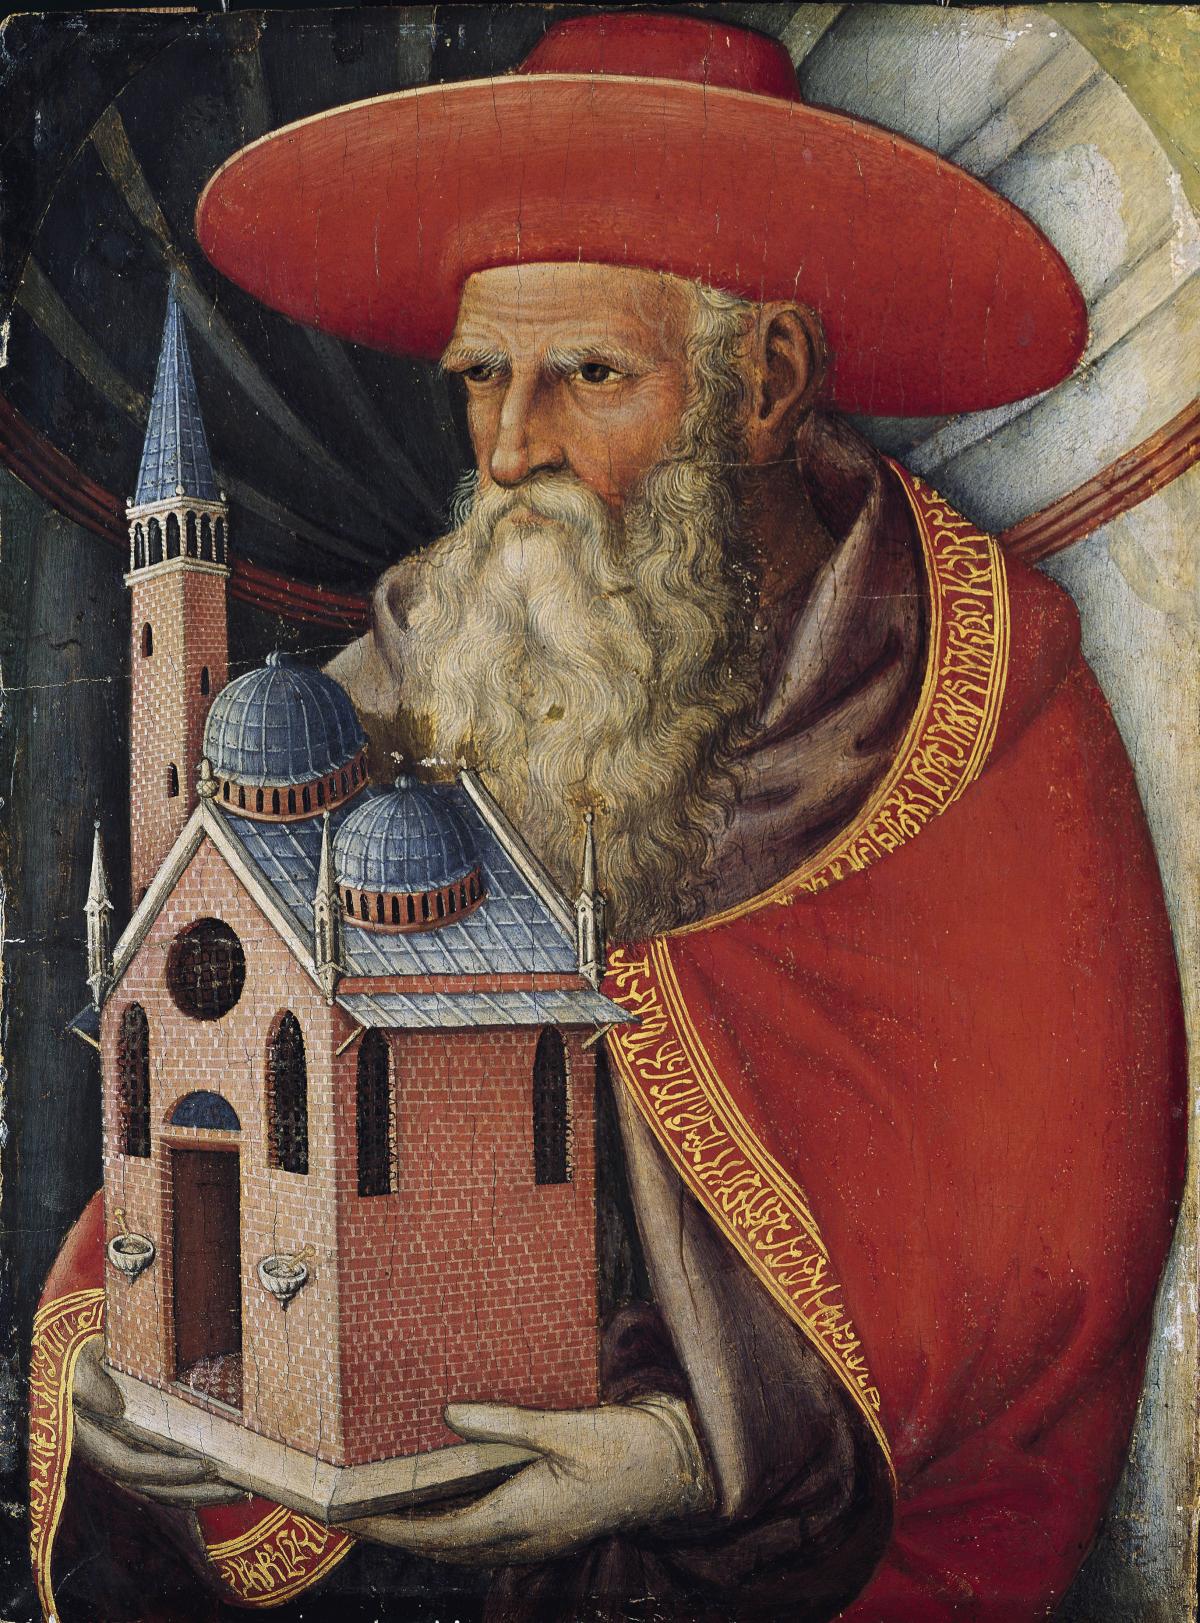 Old bearded man in a red hat and red embroidered robe, holds a miniature model of a red brick and blue church